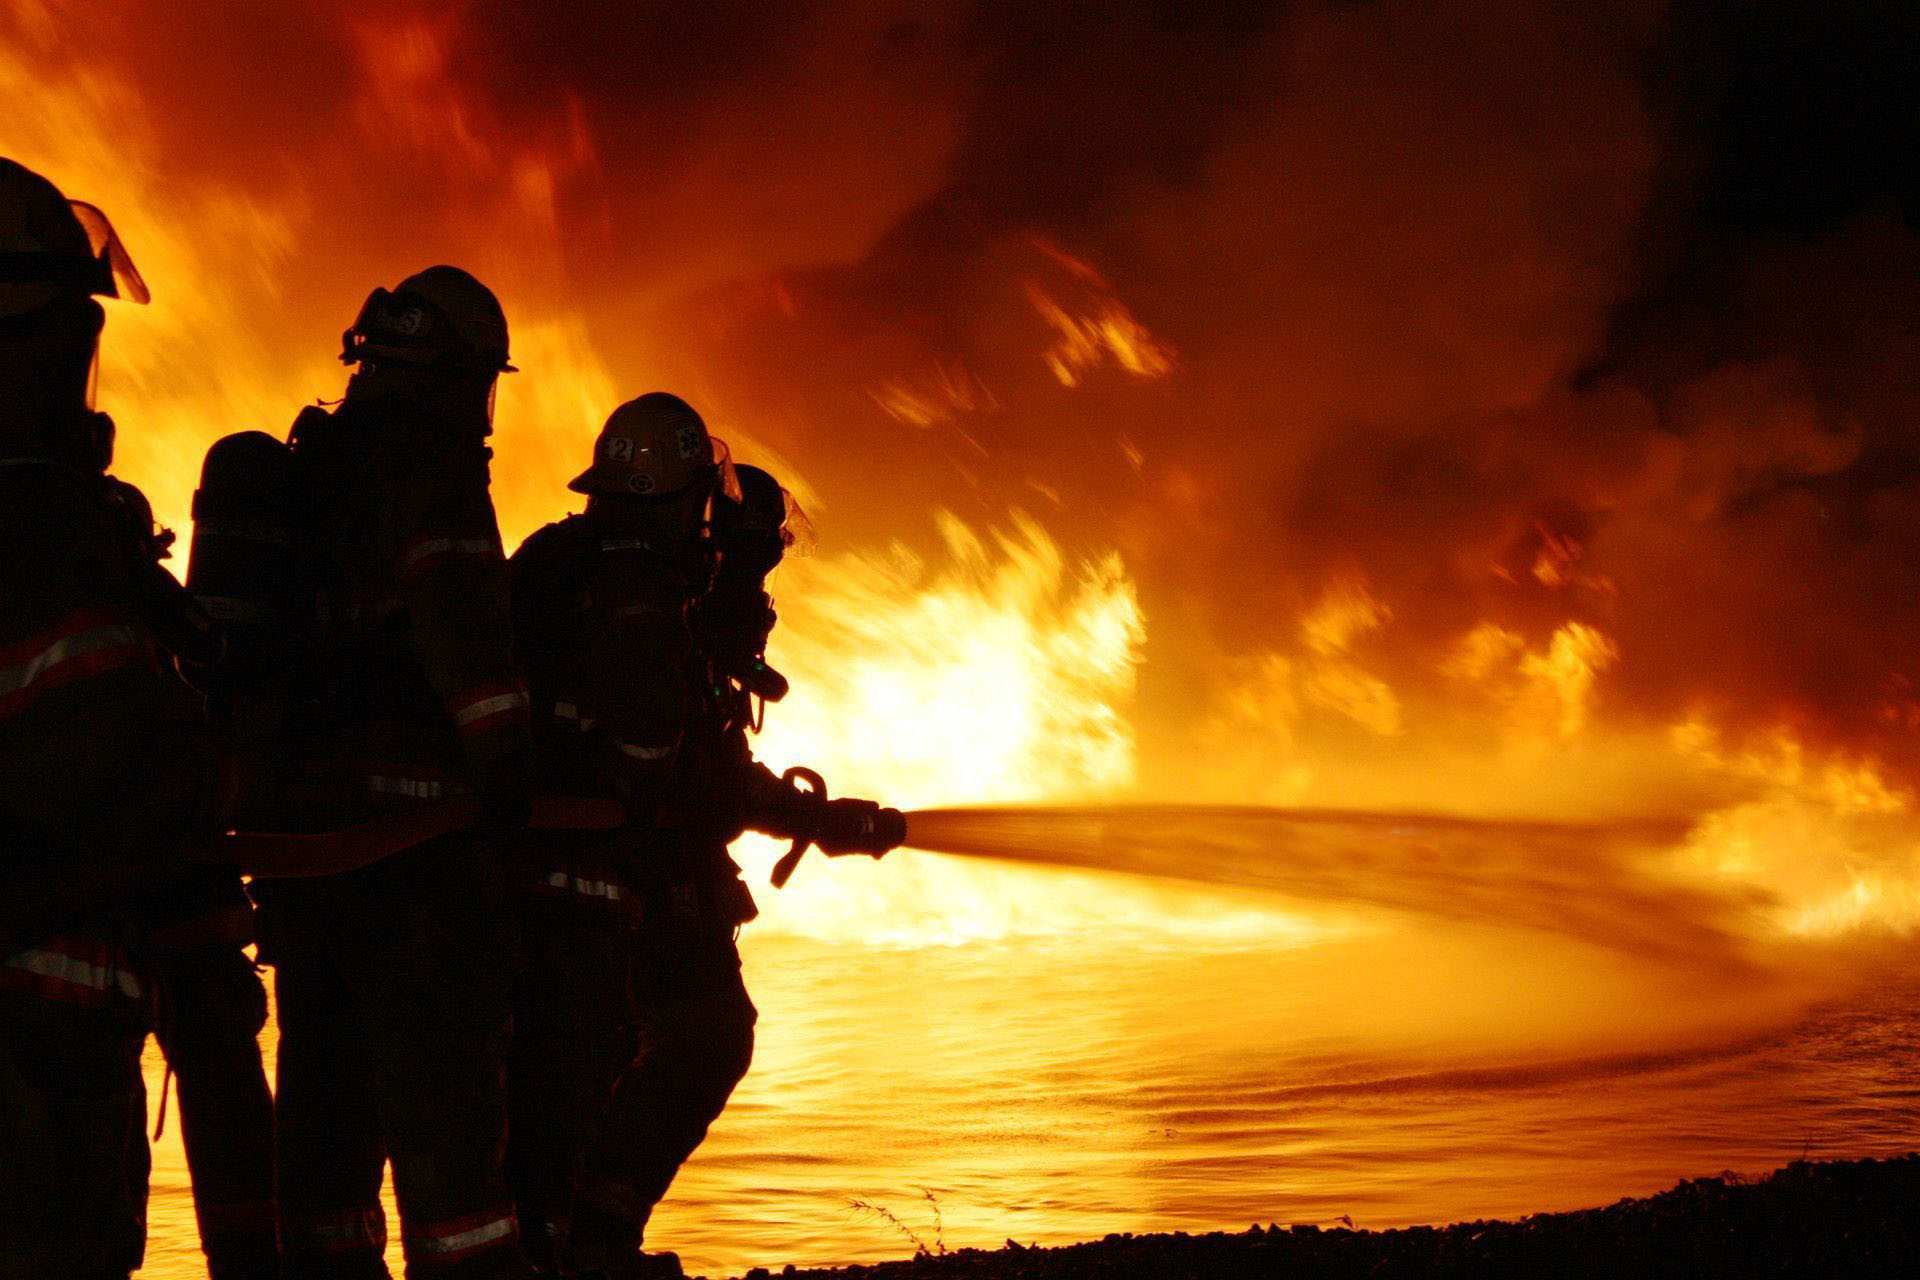 1920x1280 Download Free Images Fire Department HD.